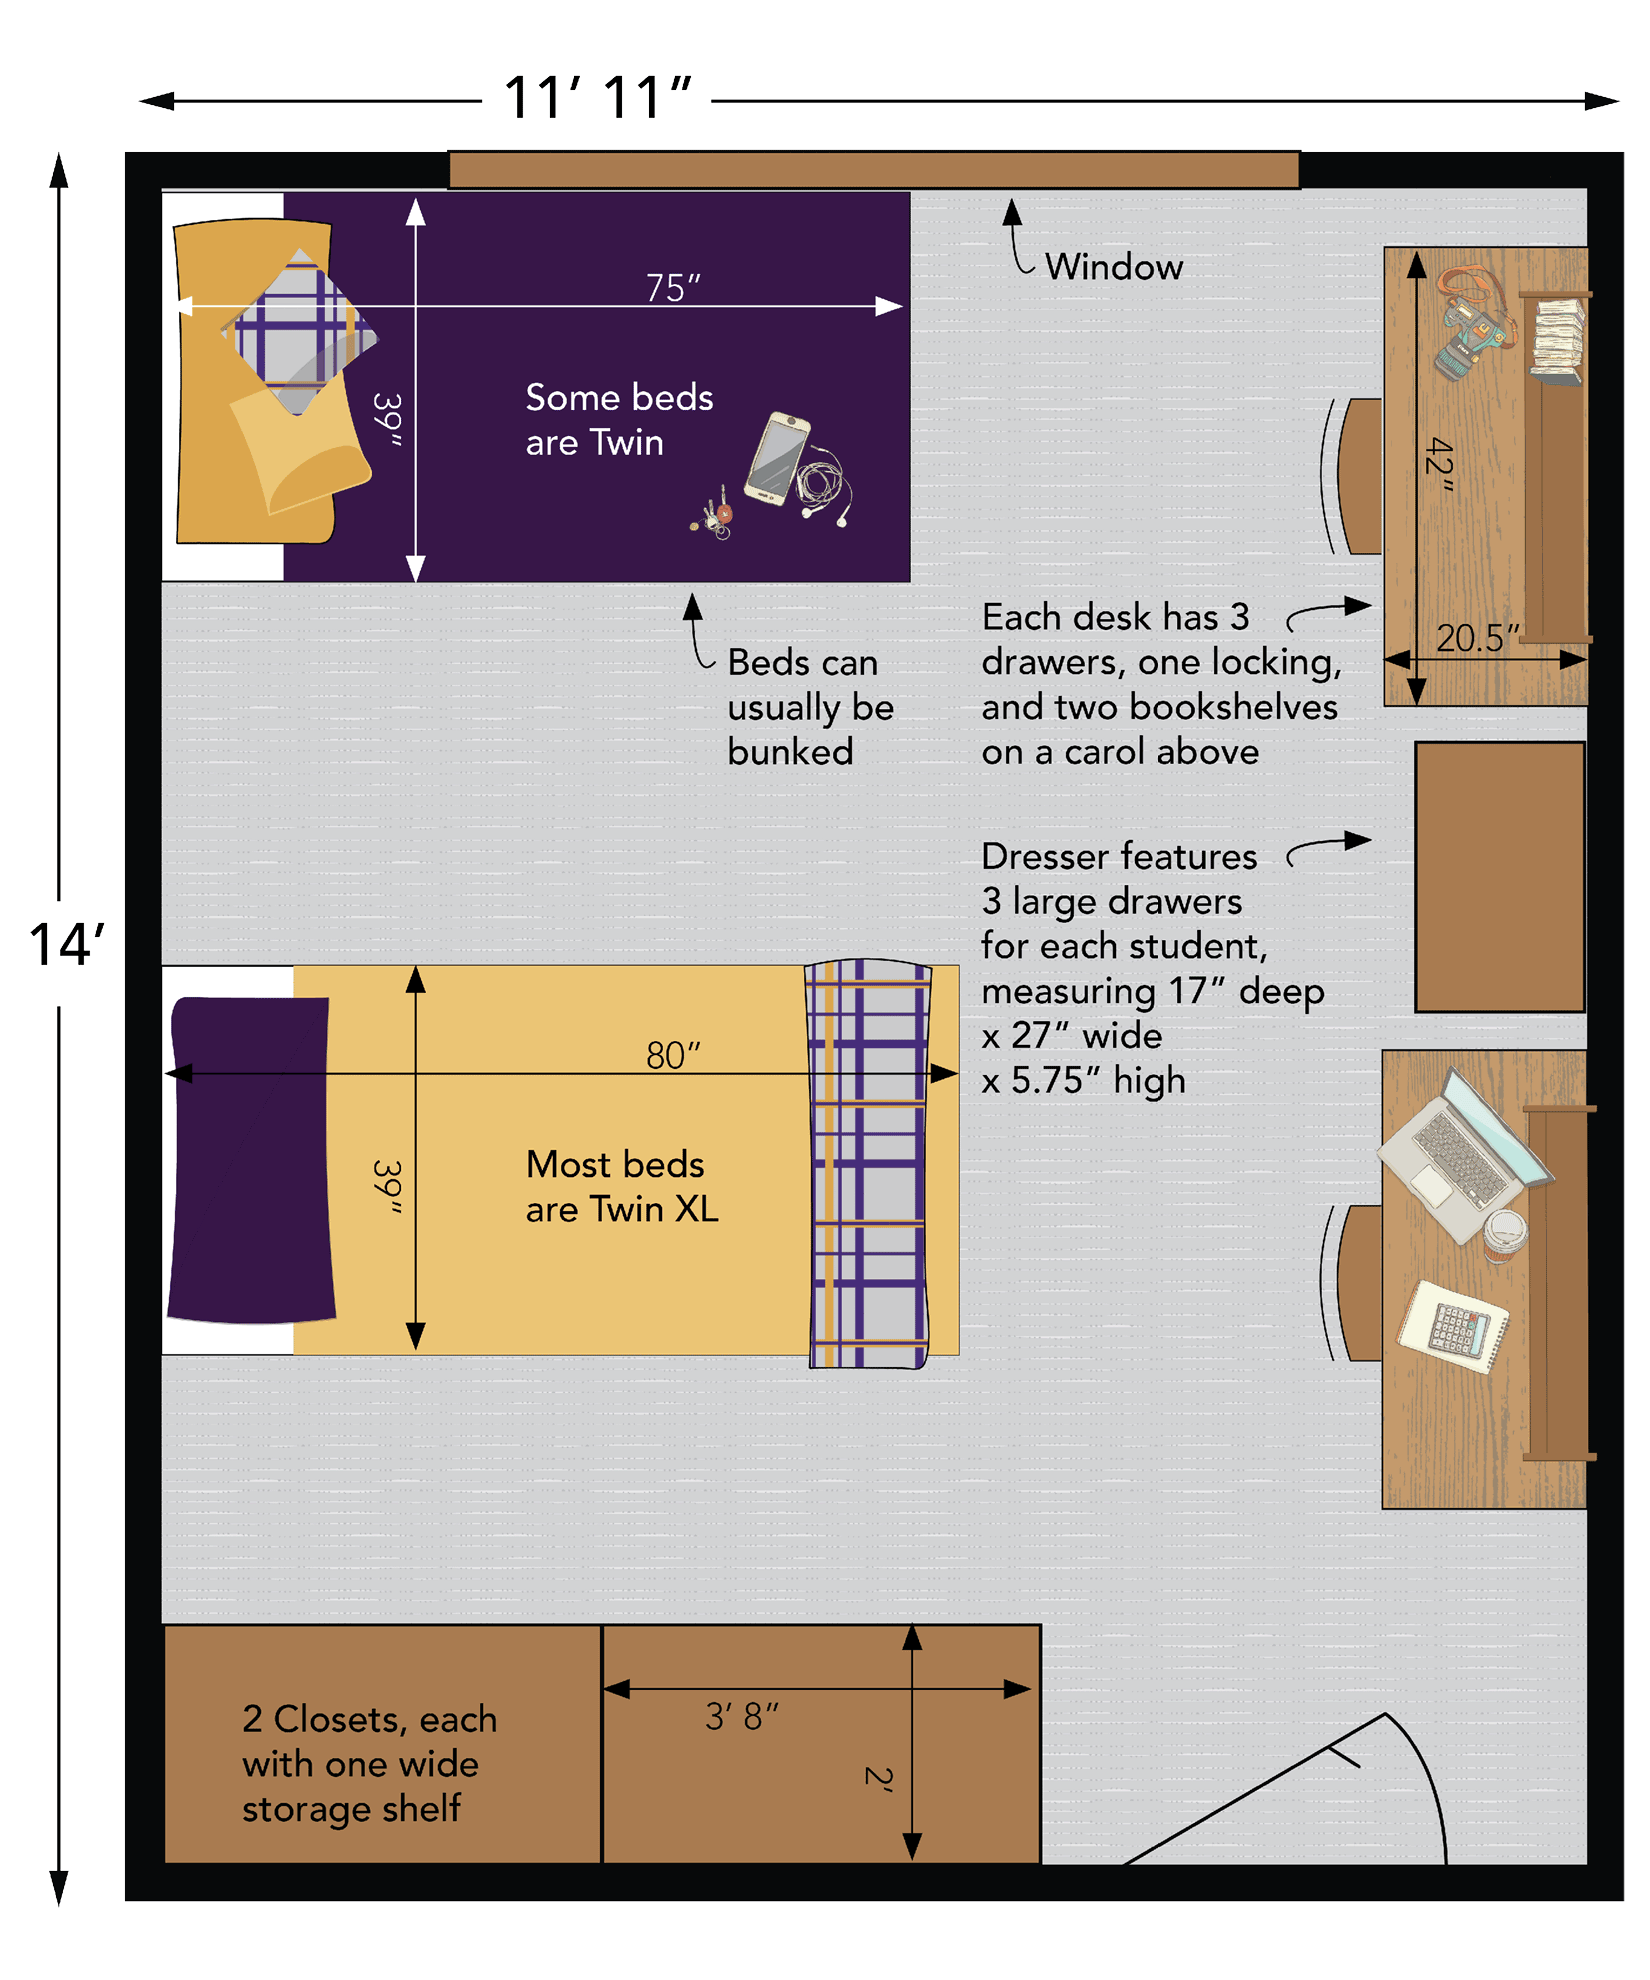 Diagram of a room in Rothenbuhler residence hall.